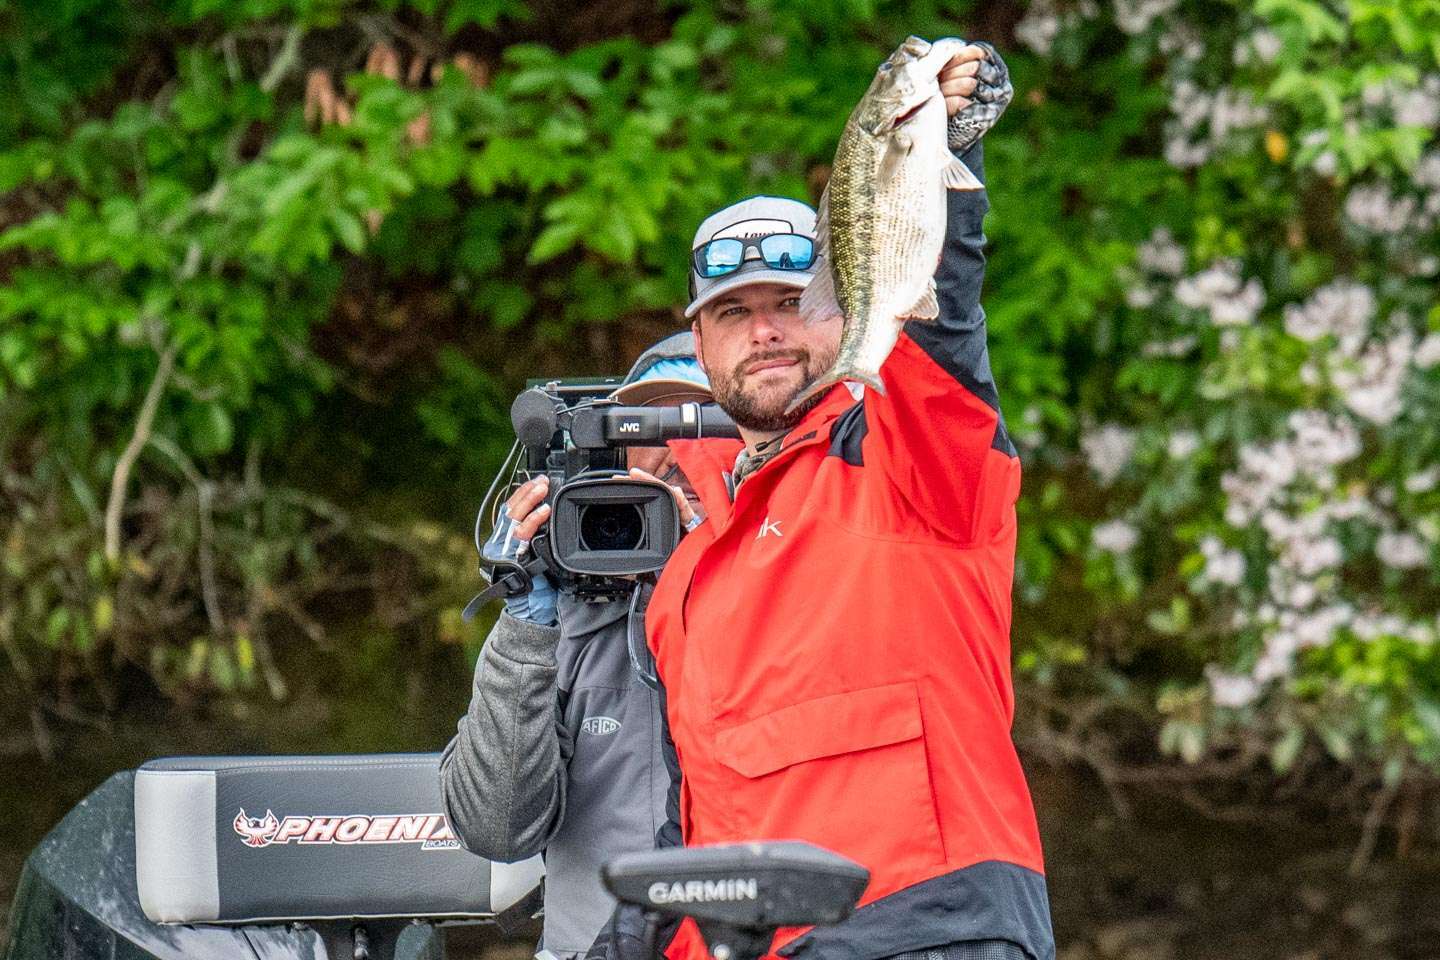 <h4>Brock Mosley</h4>
Collinsville, Mississippi<br>
Qualified via the 2021 Bassmaster Elite Series  <br>
2021 AOY Rank: 14 (584 points)